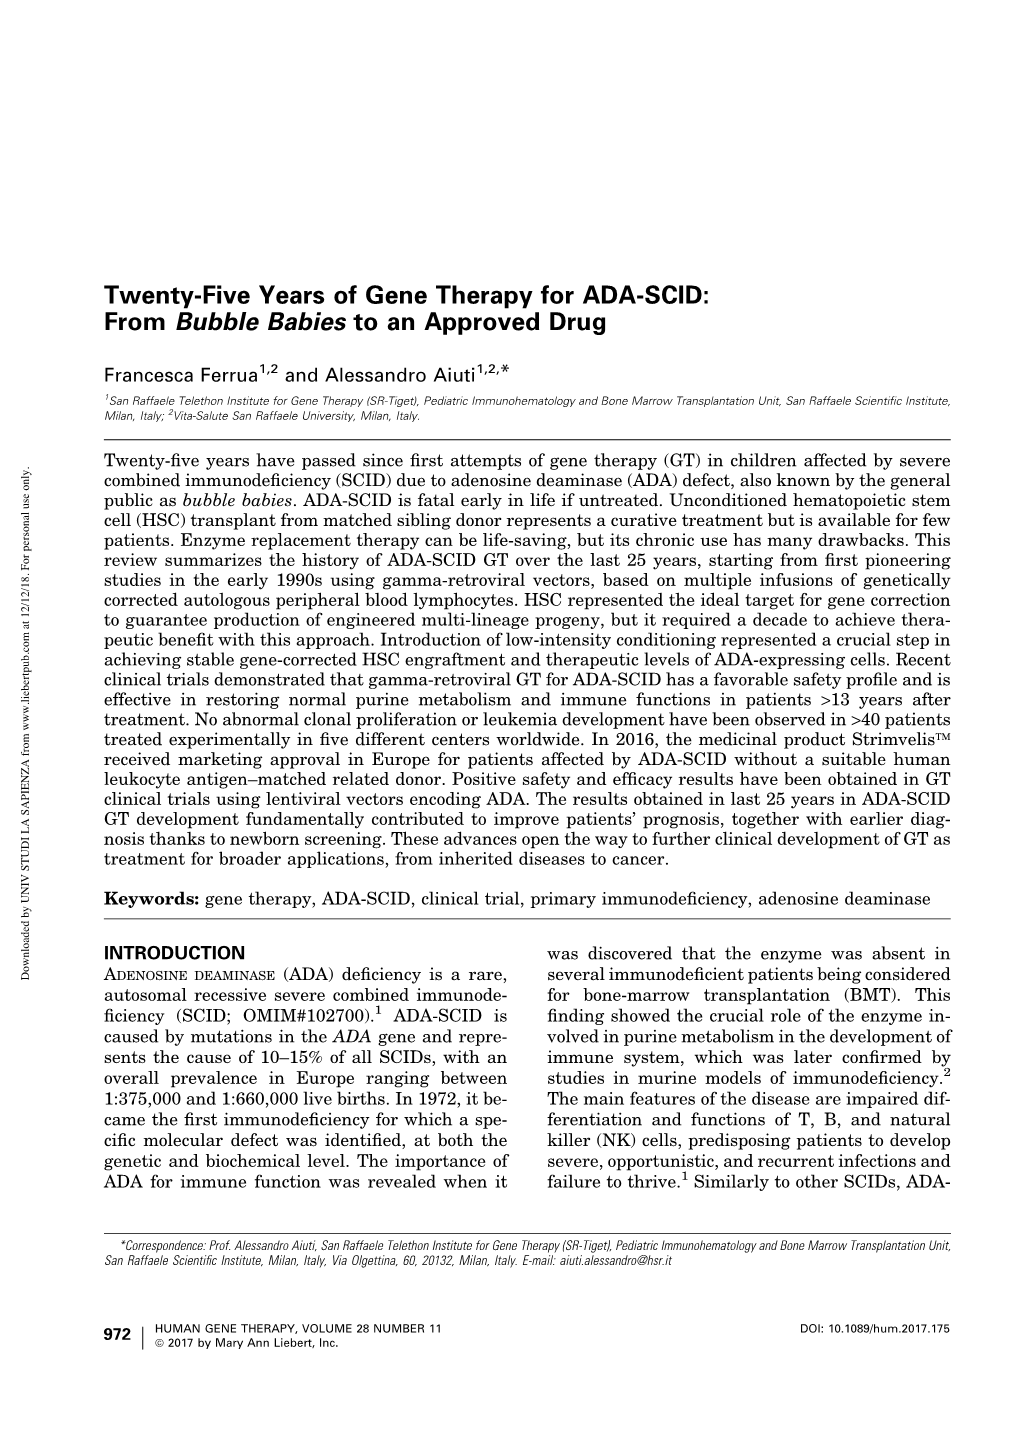 Twenty-Five Years of Gene Therapy for ADA-SCID: from Bubble Babies to an Approved Drug